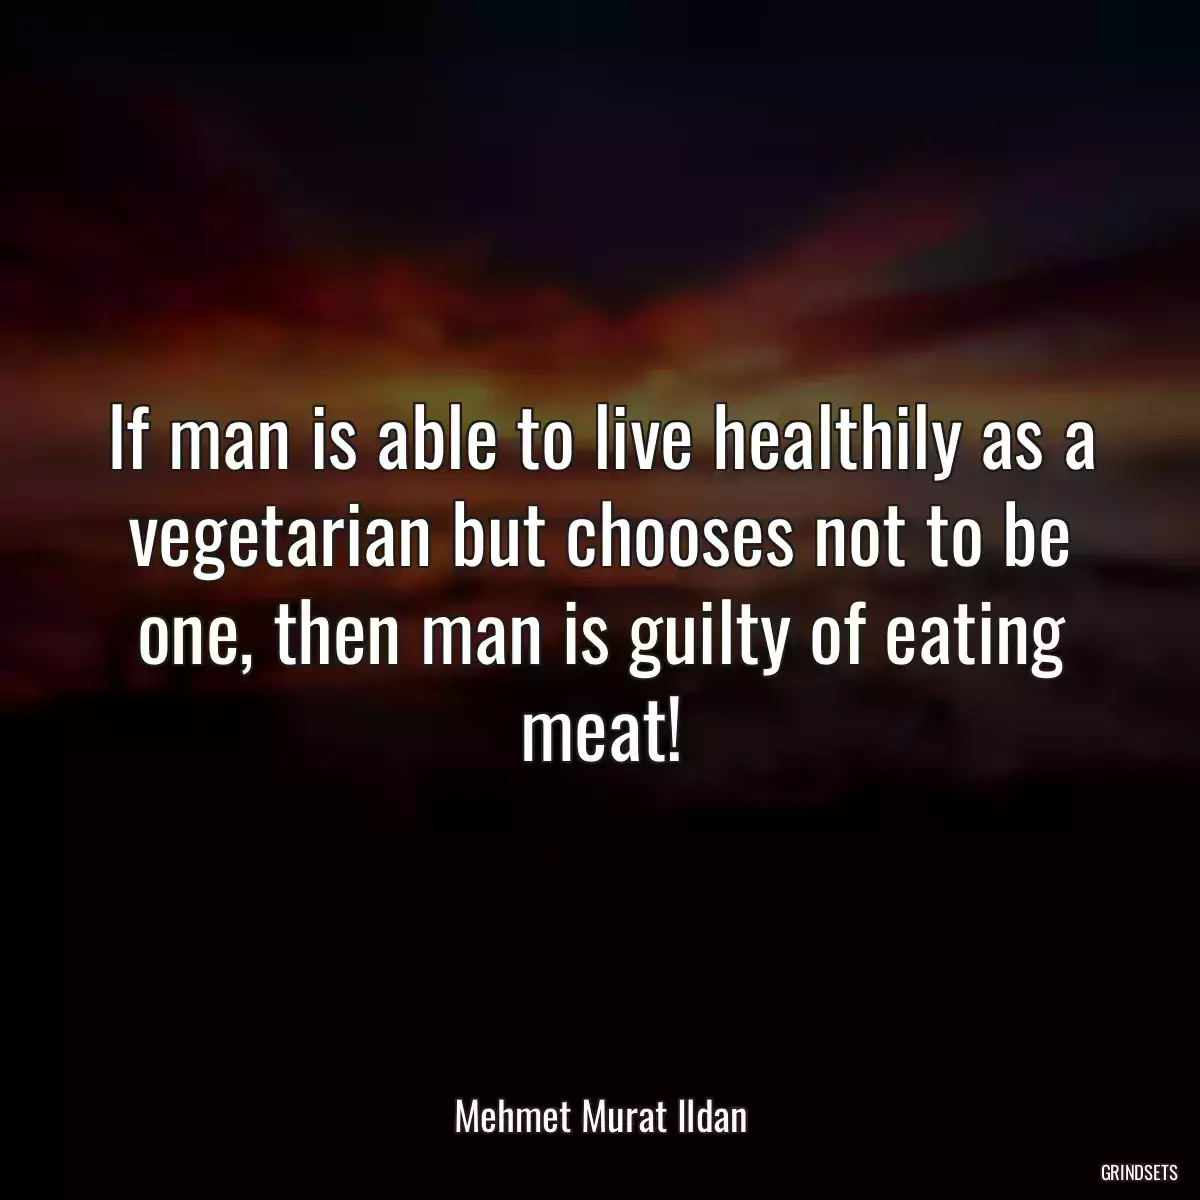 If man is able to live healthily as a vegetarian but chooses not to be one, then man is guilty of eating meat!